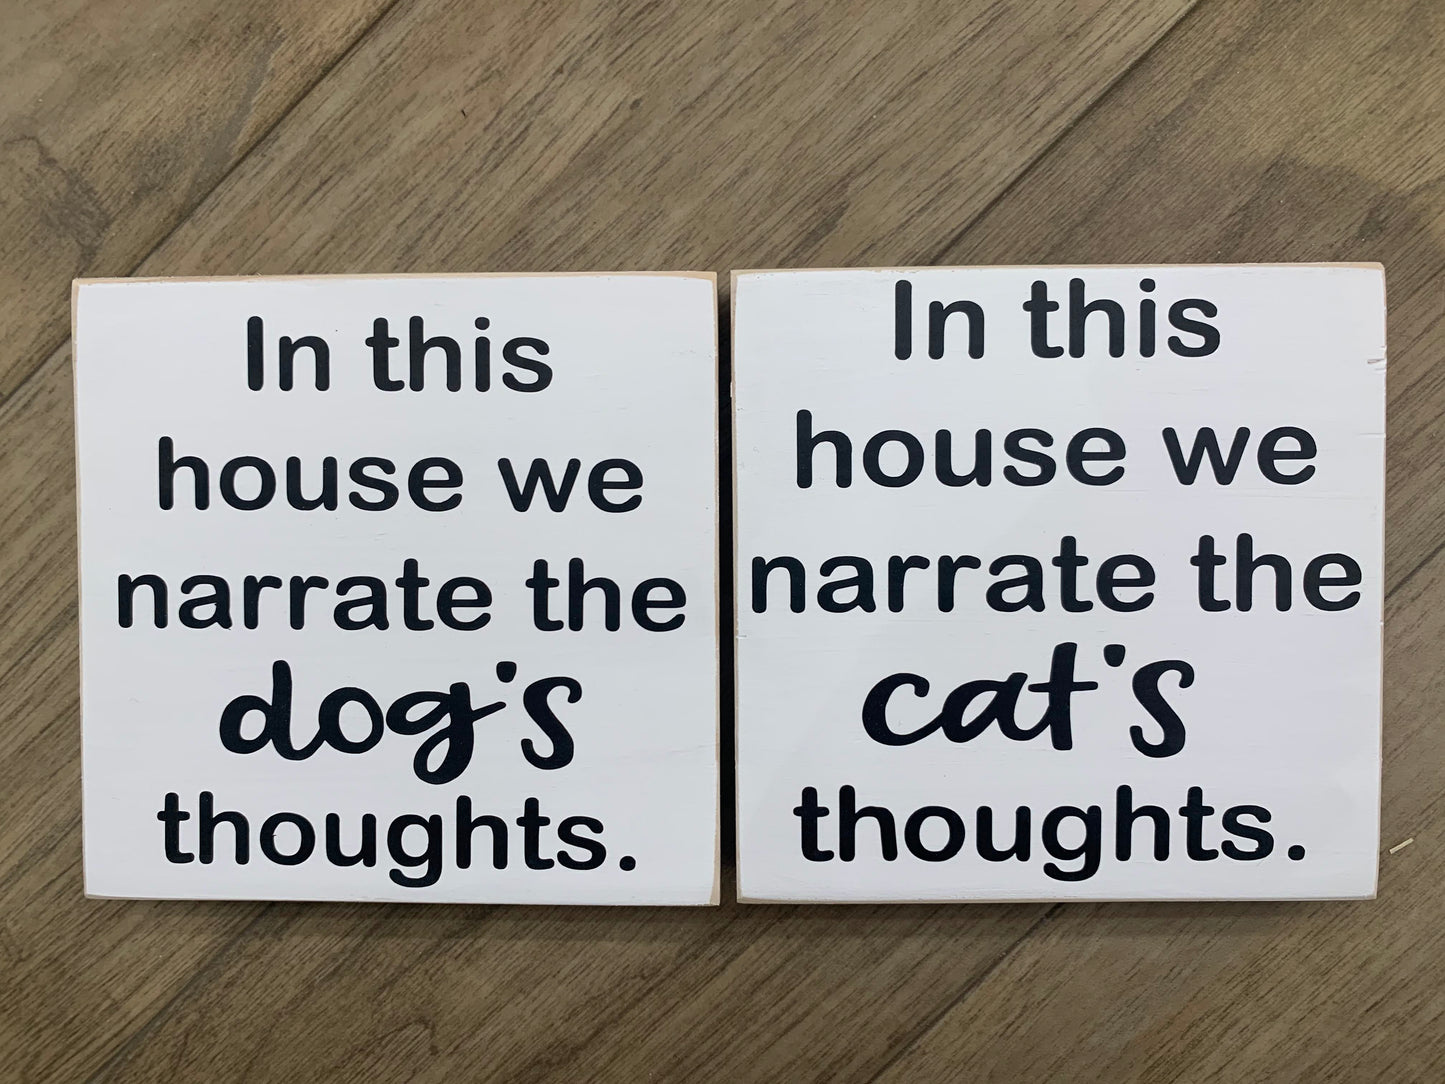 Cat/Dog Thoughts Block